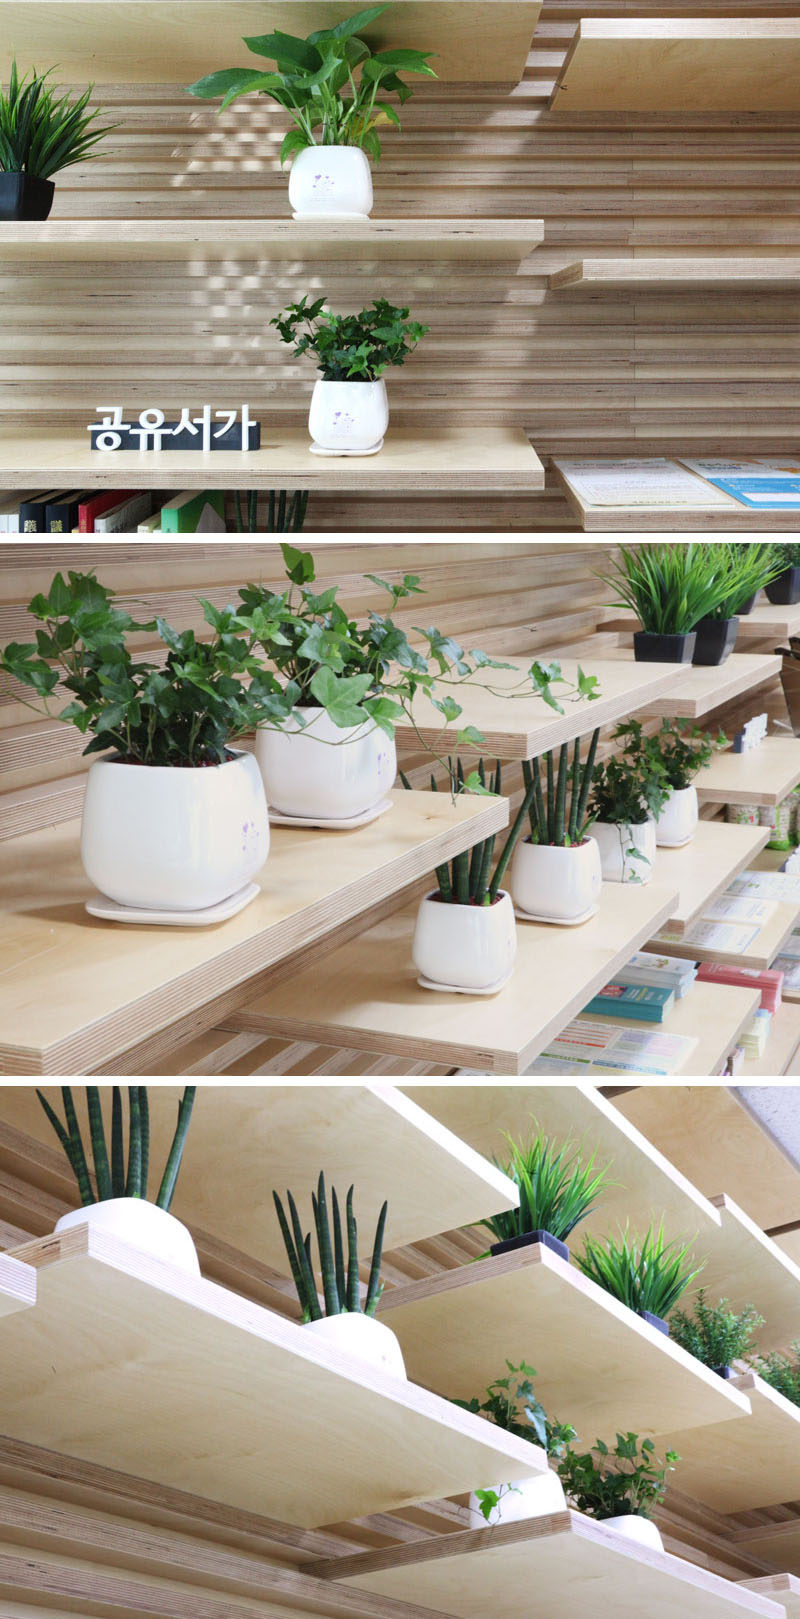 SHELVING IDEA - This Wood Slot Wall Can Reposition Shelves Anywhere